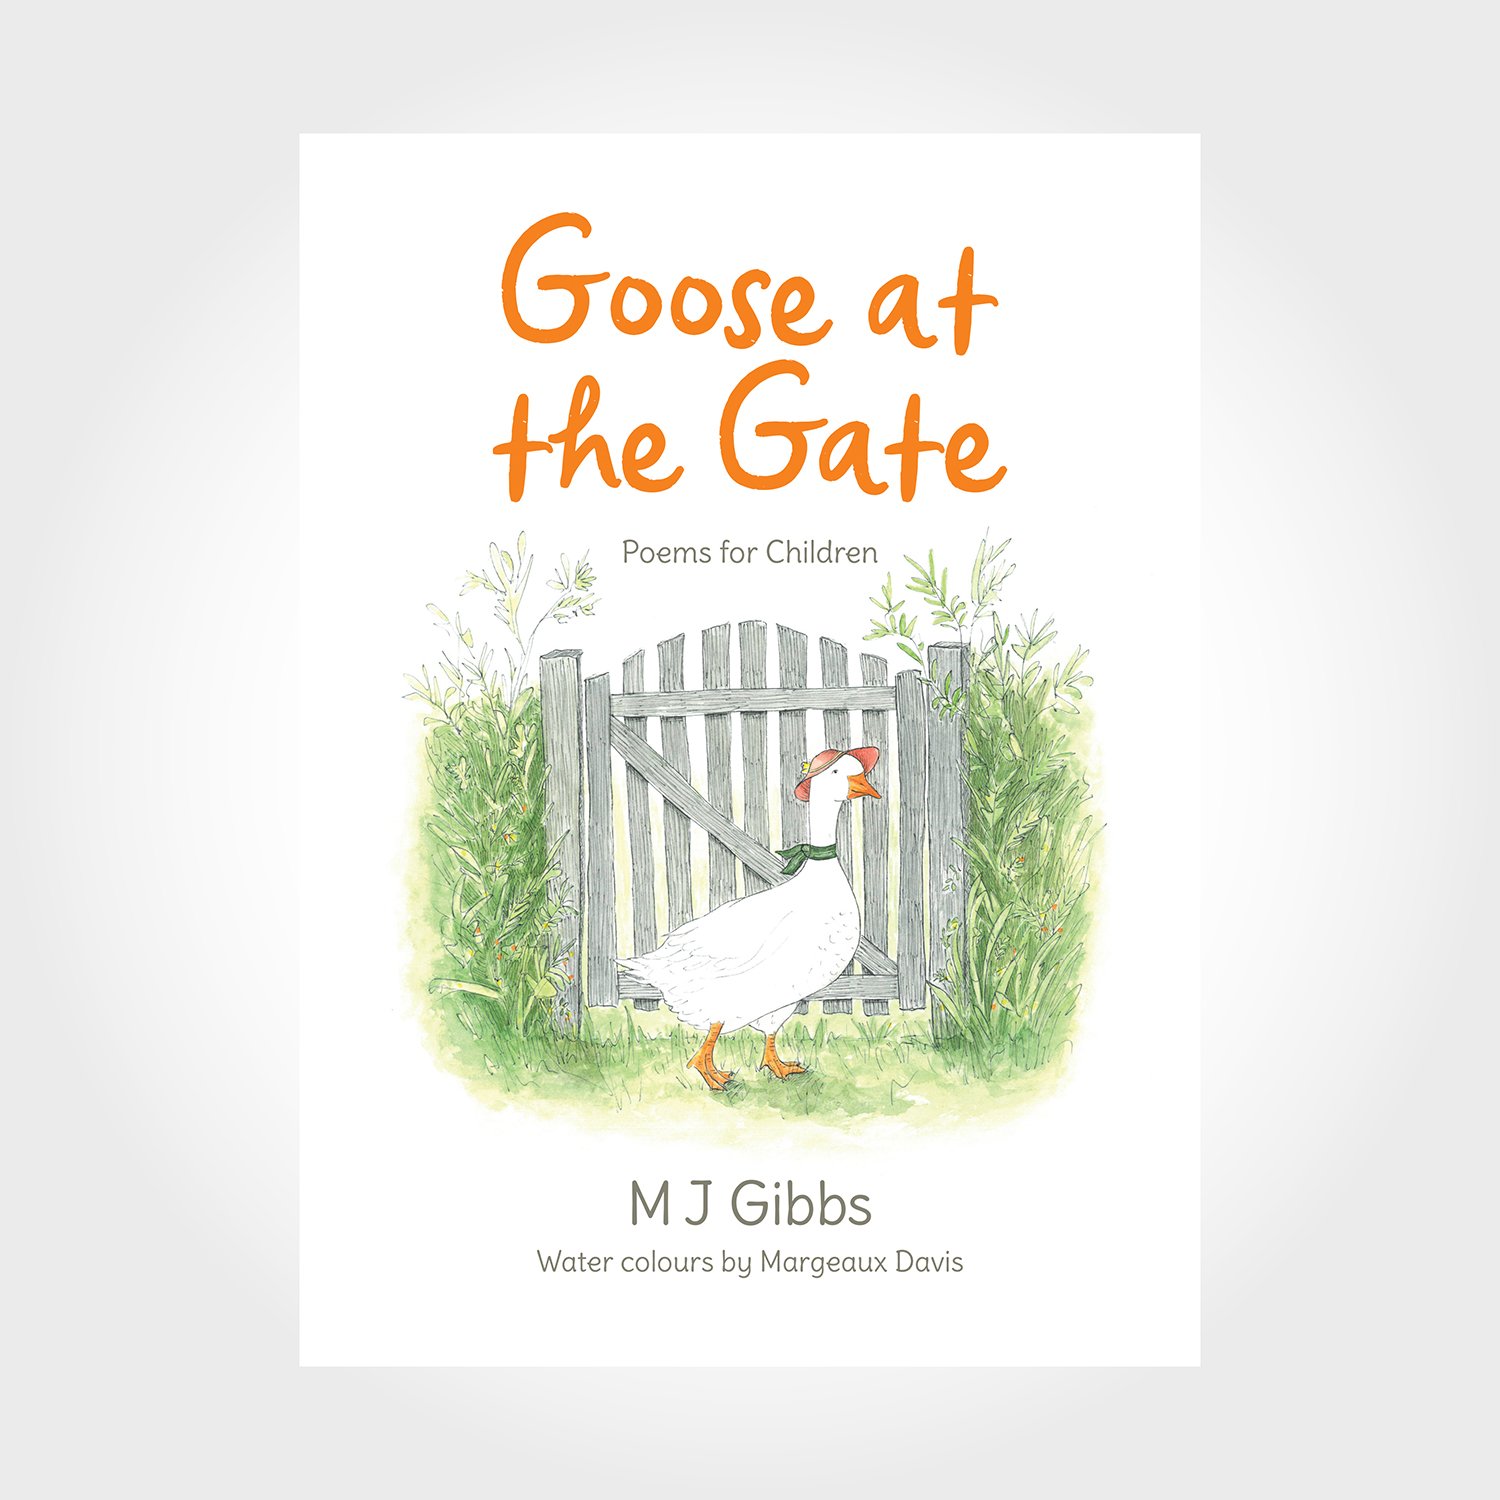 Goose at the Gate